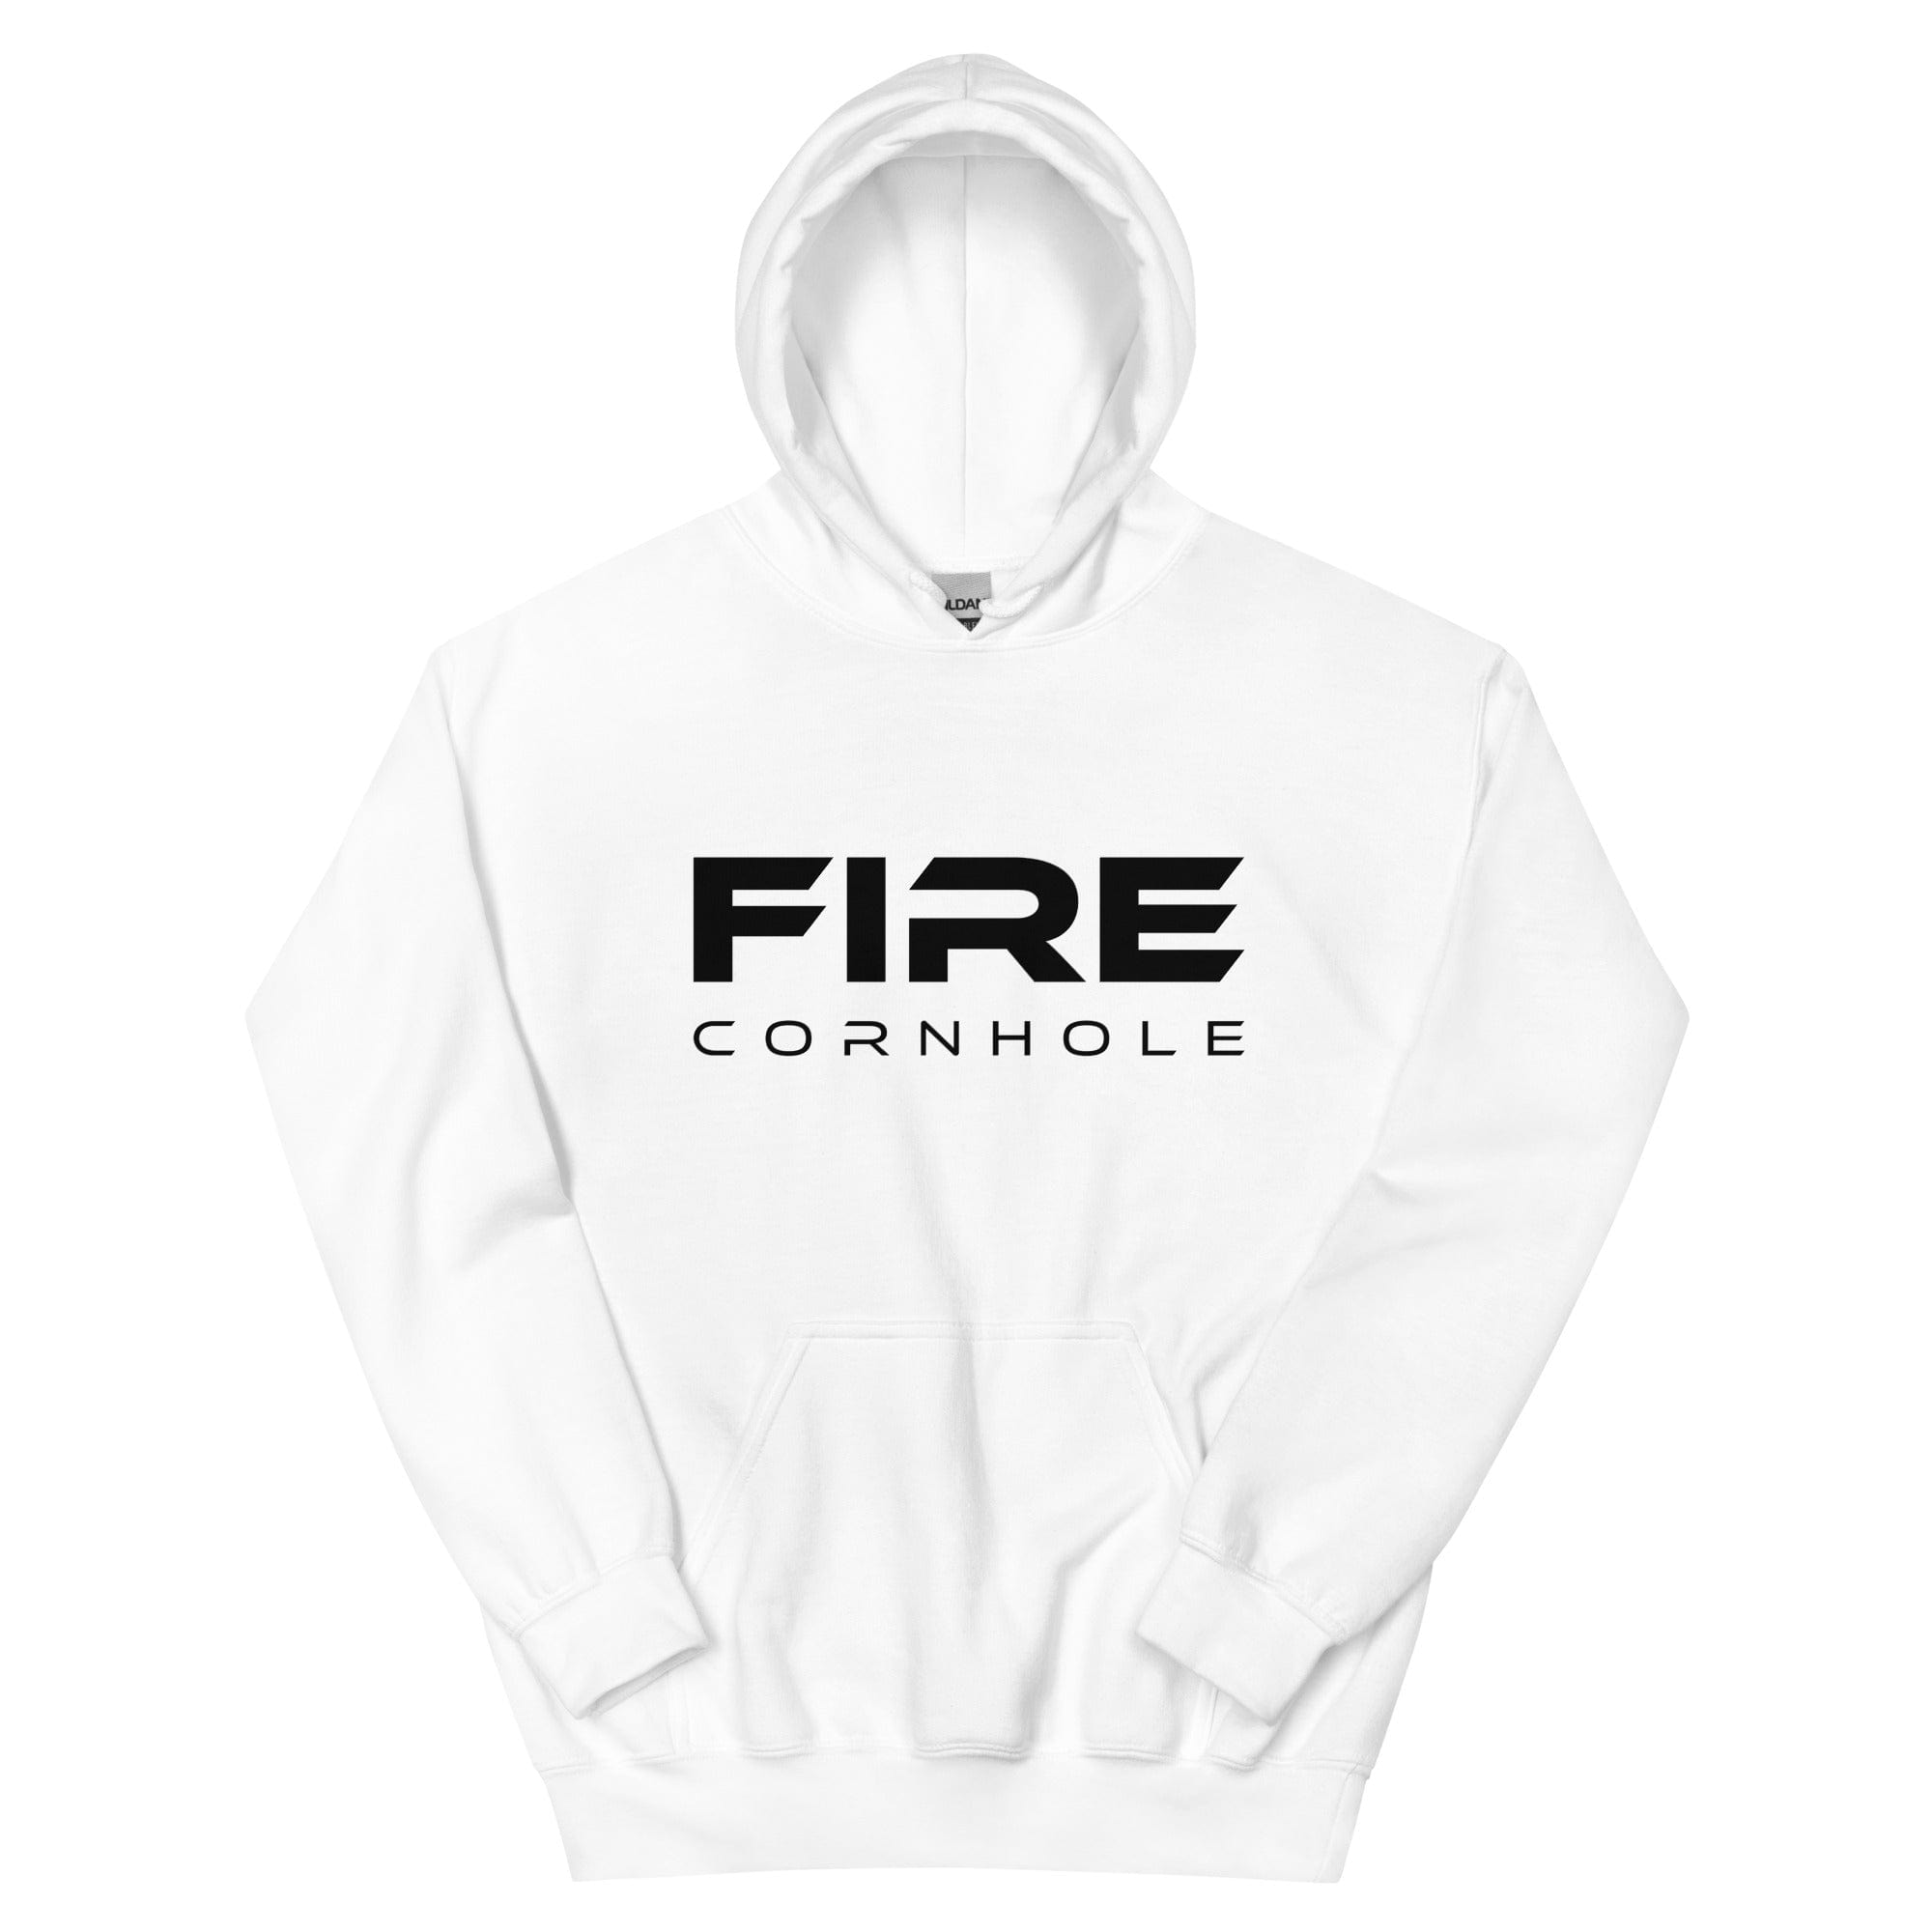 White unisex cotton hoodie with Fire Cornhole logo in black